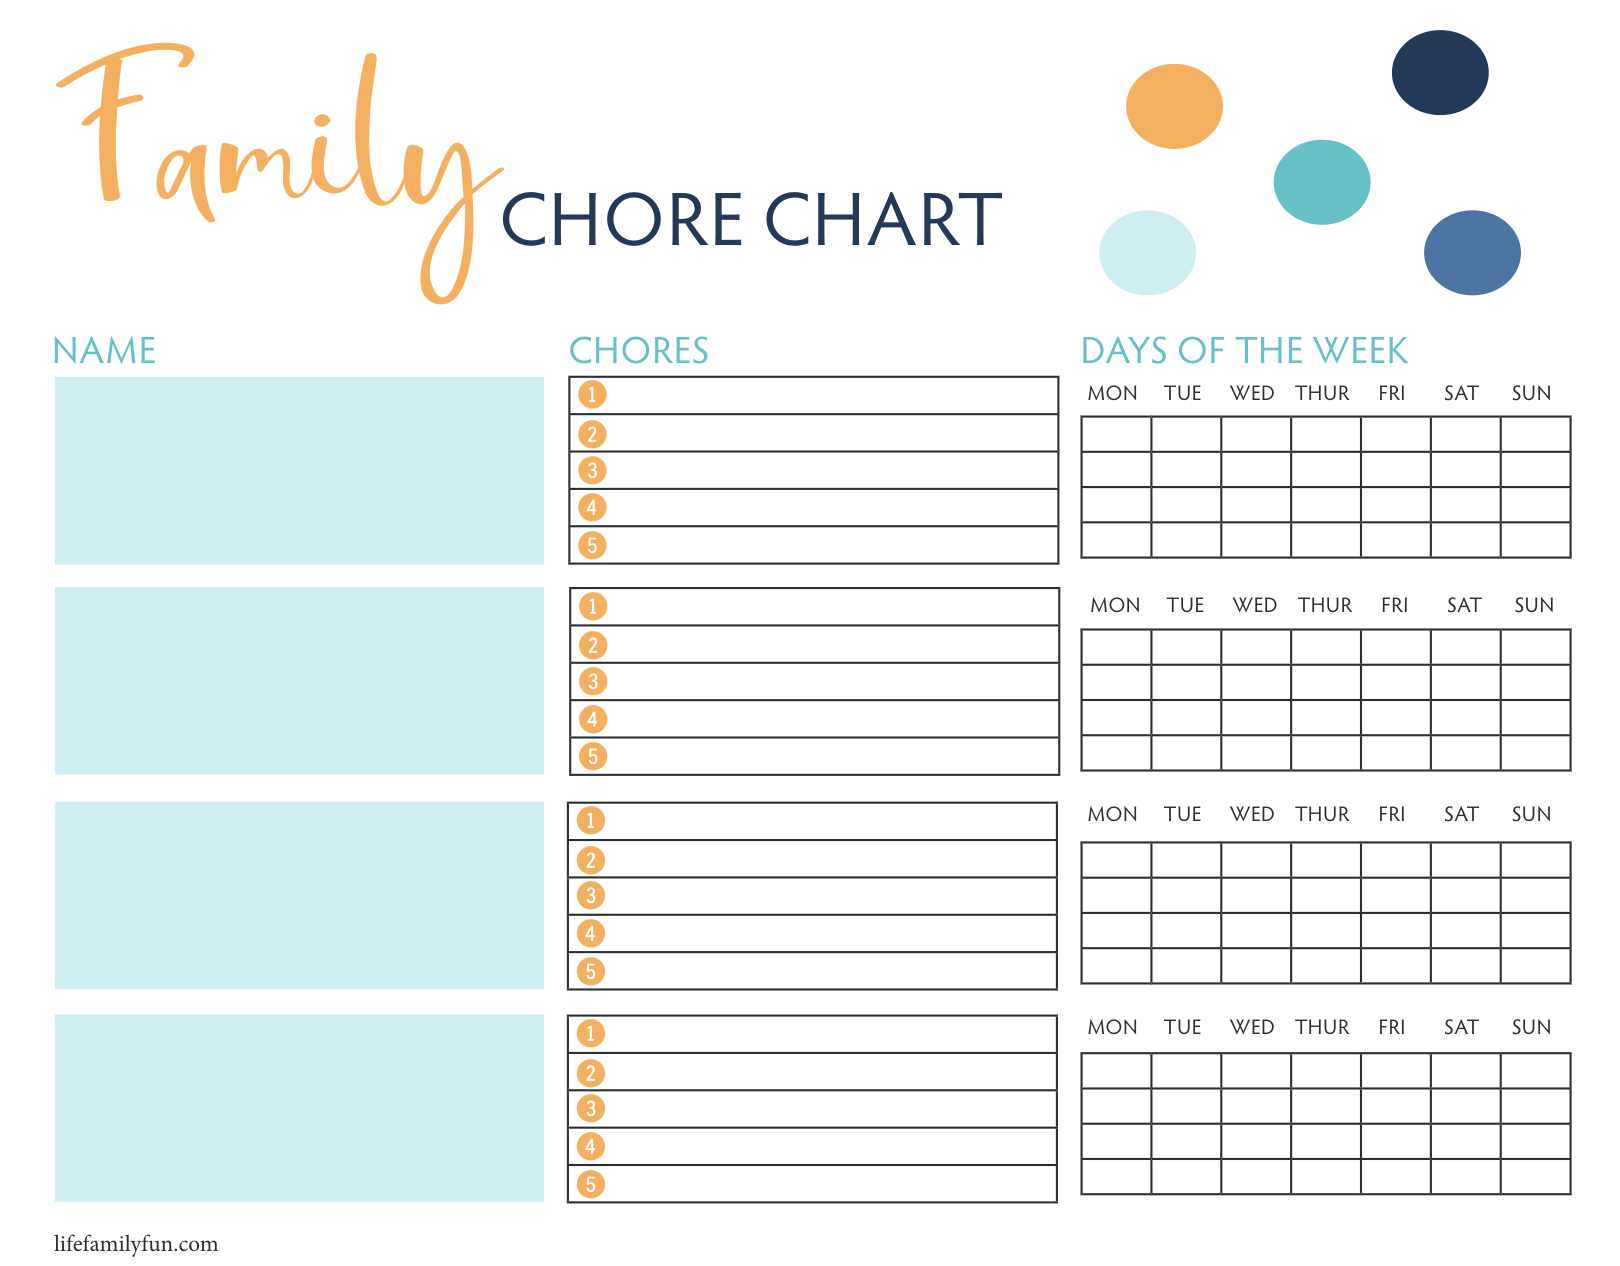 6-best-images-of-printable-kids-daily-routine-schedule-38-free